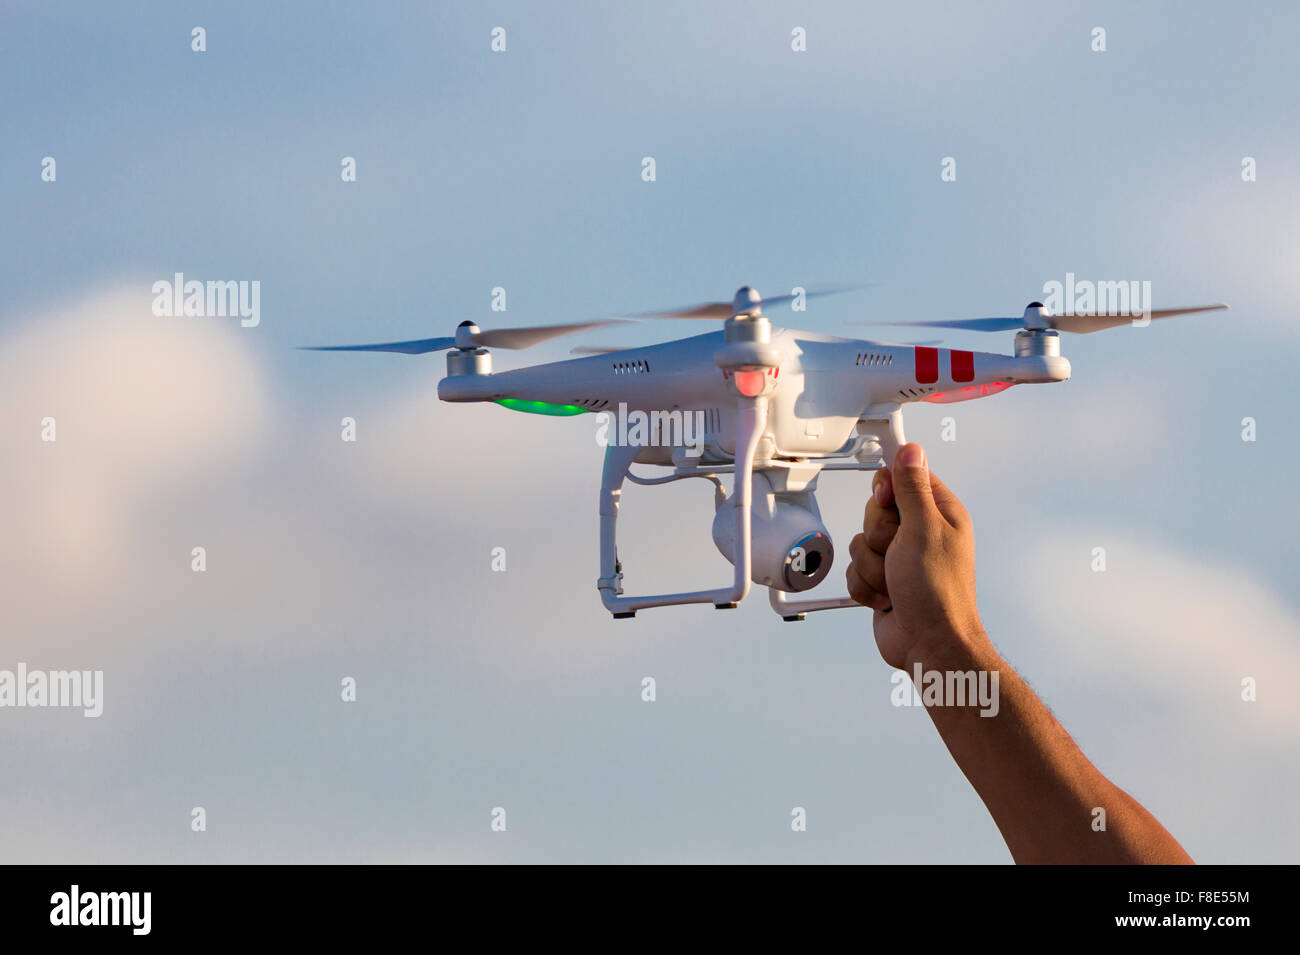 Flying radio controlled DJI Phantom quadcopter drone with video camera  landing and ready to be catch by man hand. Colombia 2015 Stock Photo - Alamy